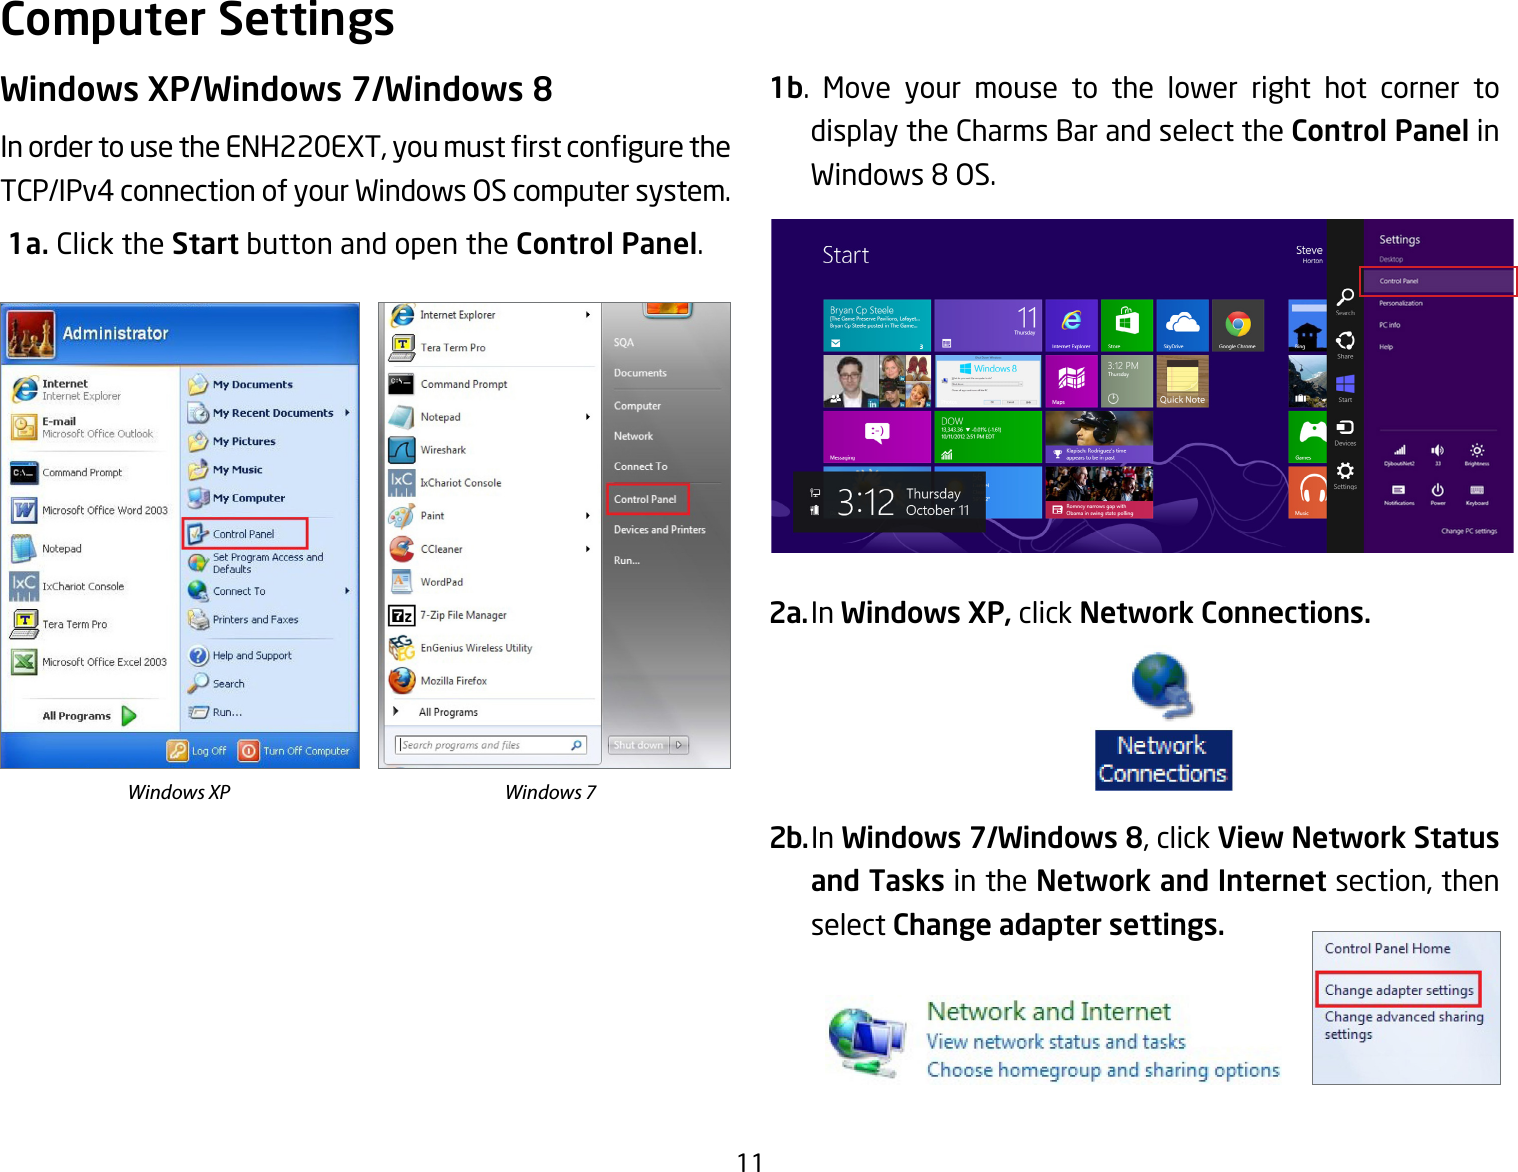 11Windows XP/Windows 7/Windows 8InordertousetheENH220EXT,youmustrstconguretheTCP/IPv4 connection of your Windows OS computer system. 1a. Click the Start button and open the Control Panel.1b. Move your mouse to the lower right hot corner to  display the Charms Bar and select the Control Panel in Windows 8 OS.2a. In Windows XP, click Network Connections. 2b. In Windows 7/Windows 8, click View Network Status and Tasks in the Network and Internet section, then select Change adapter settings.Computer SettingsWindows XP Windows 7